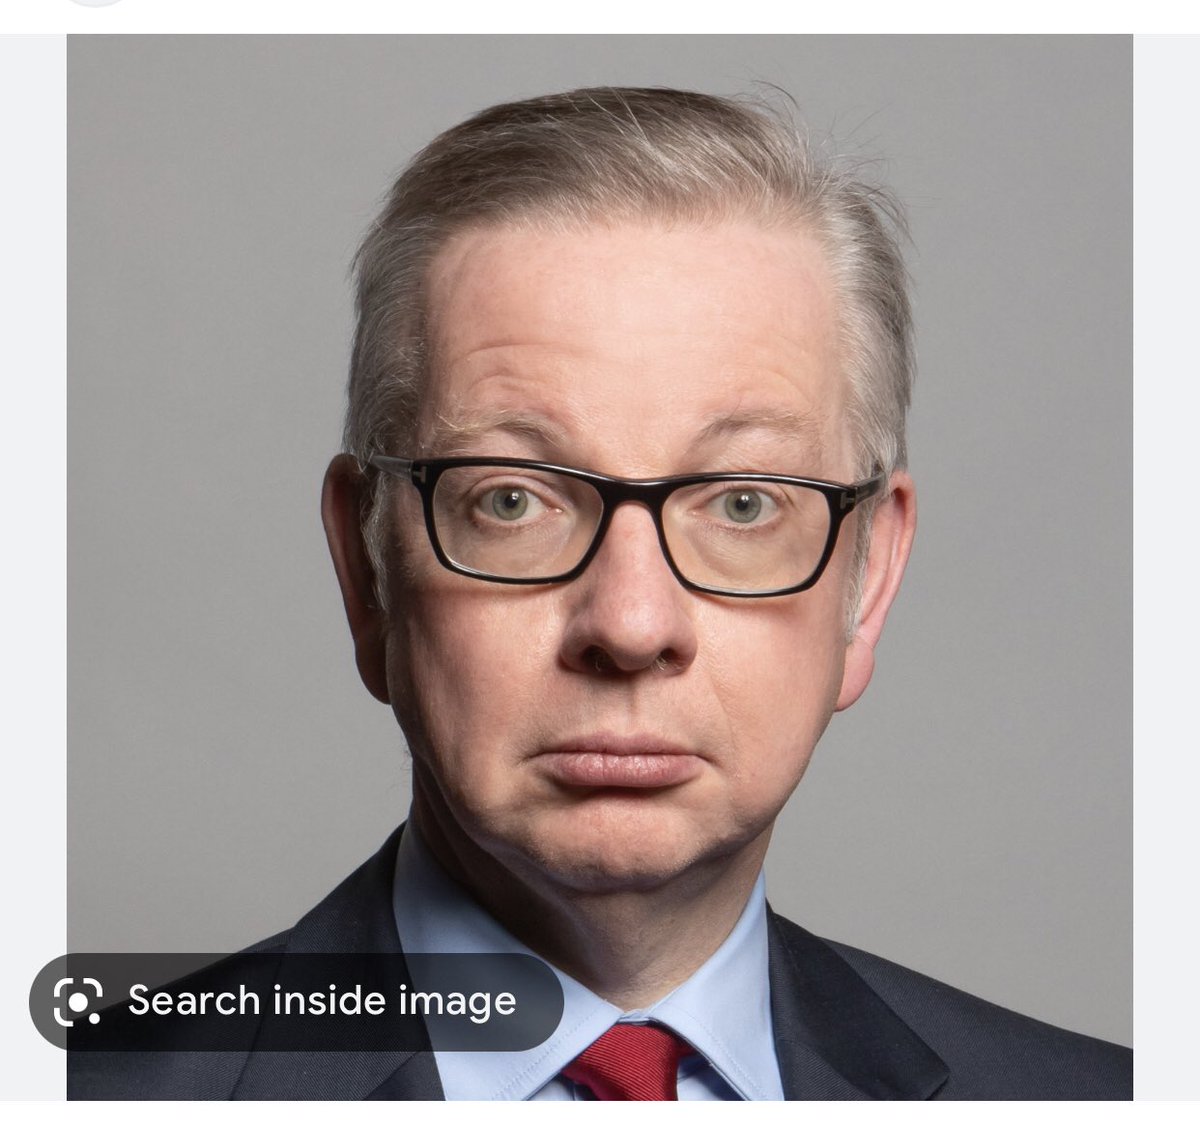 Has anyone seen “Jo Brand & Michael Gove” in the same room together…. Ever?? Sorry Jo 🤔